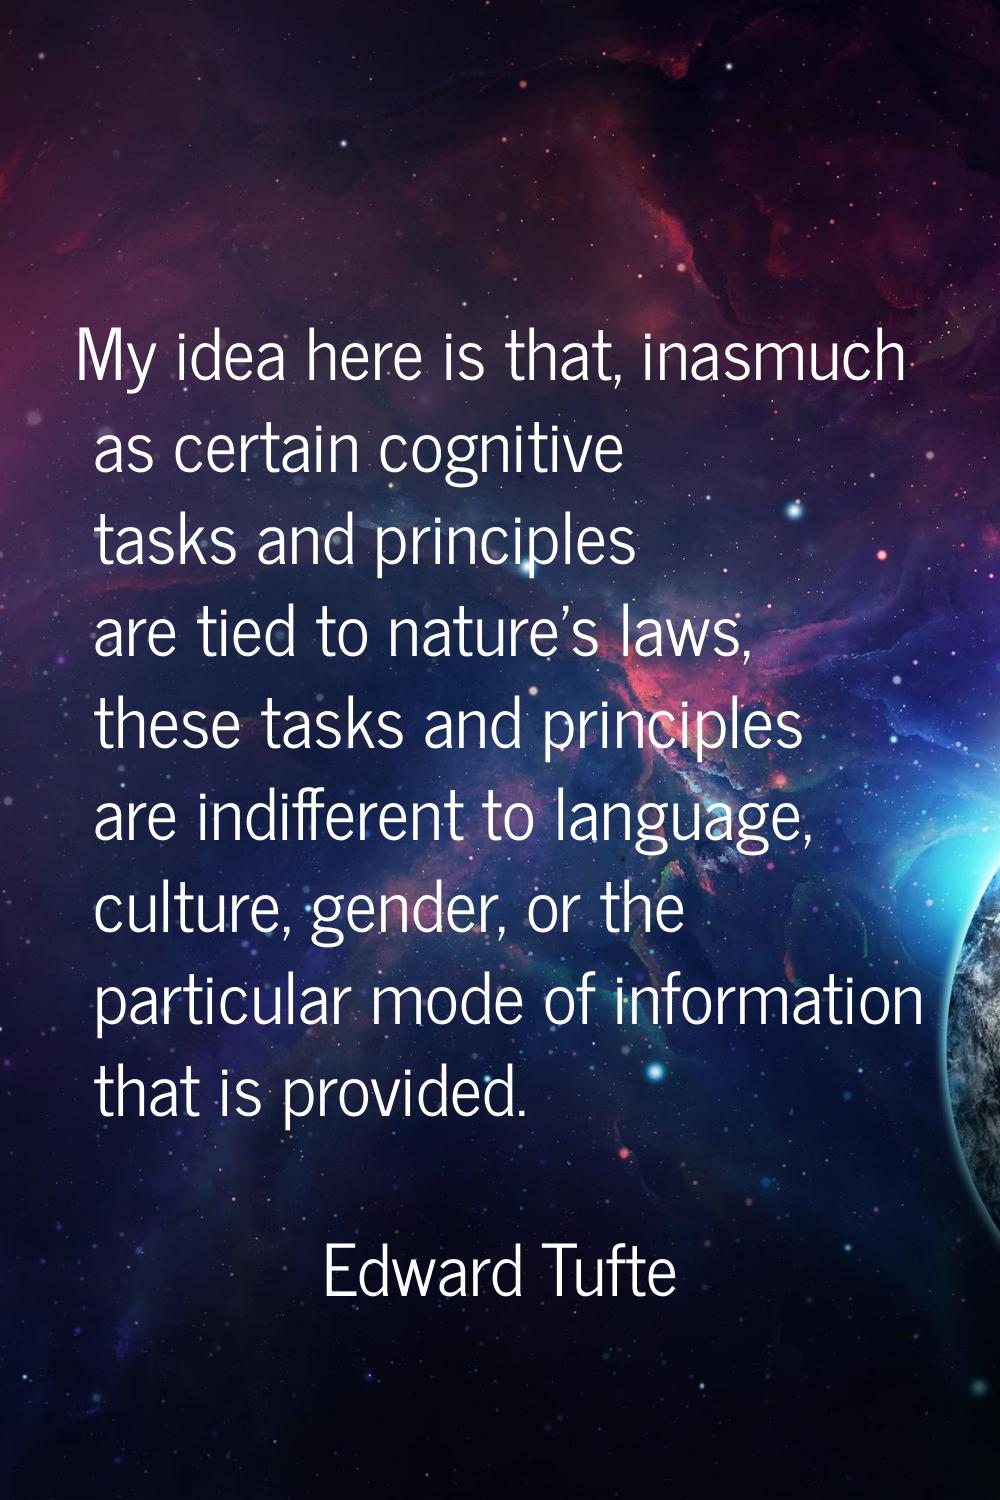 My idea here is that, inasmuch as certain cognitive tasks and principles are tied to nature's laws,